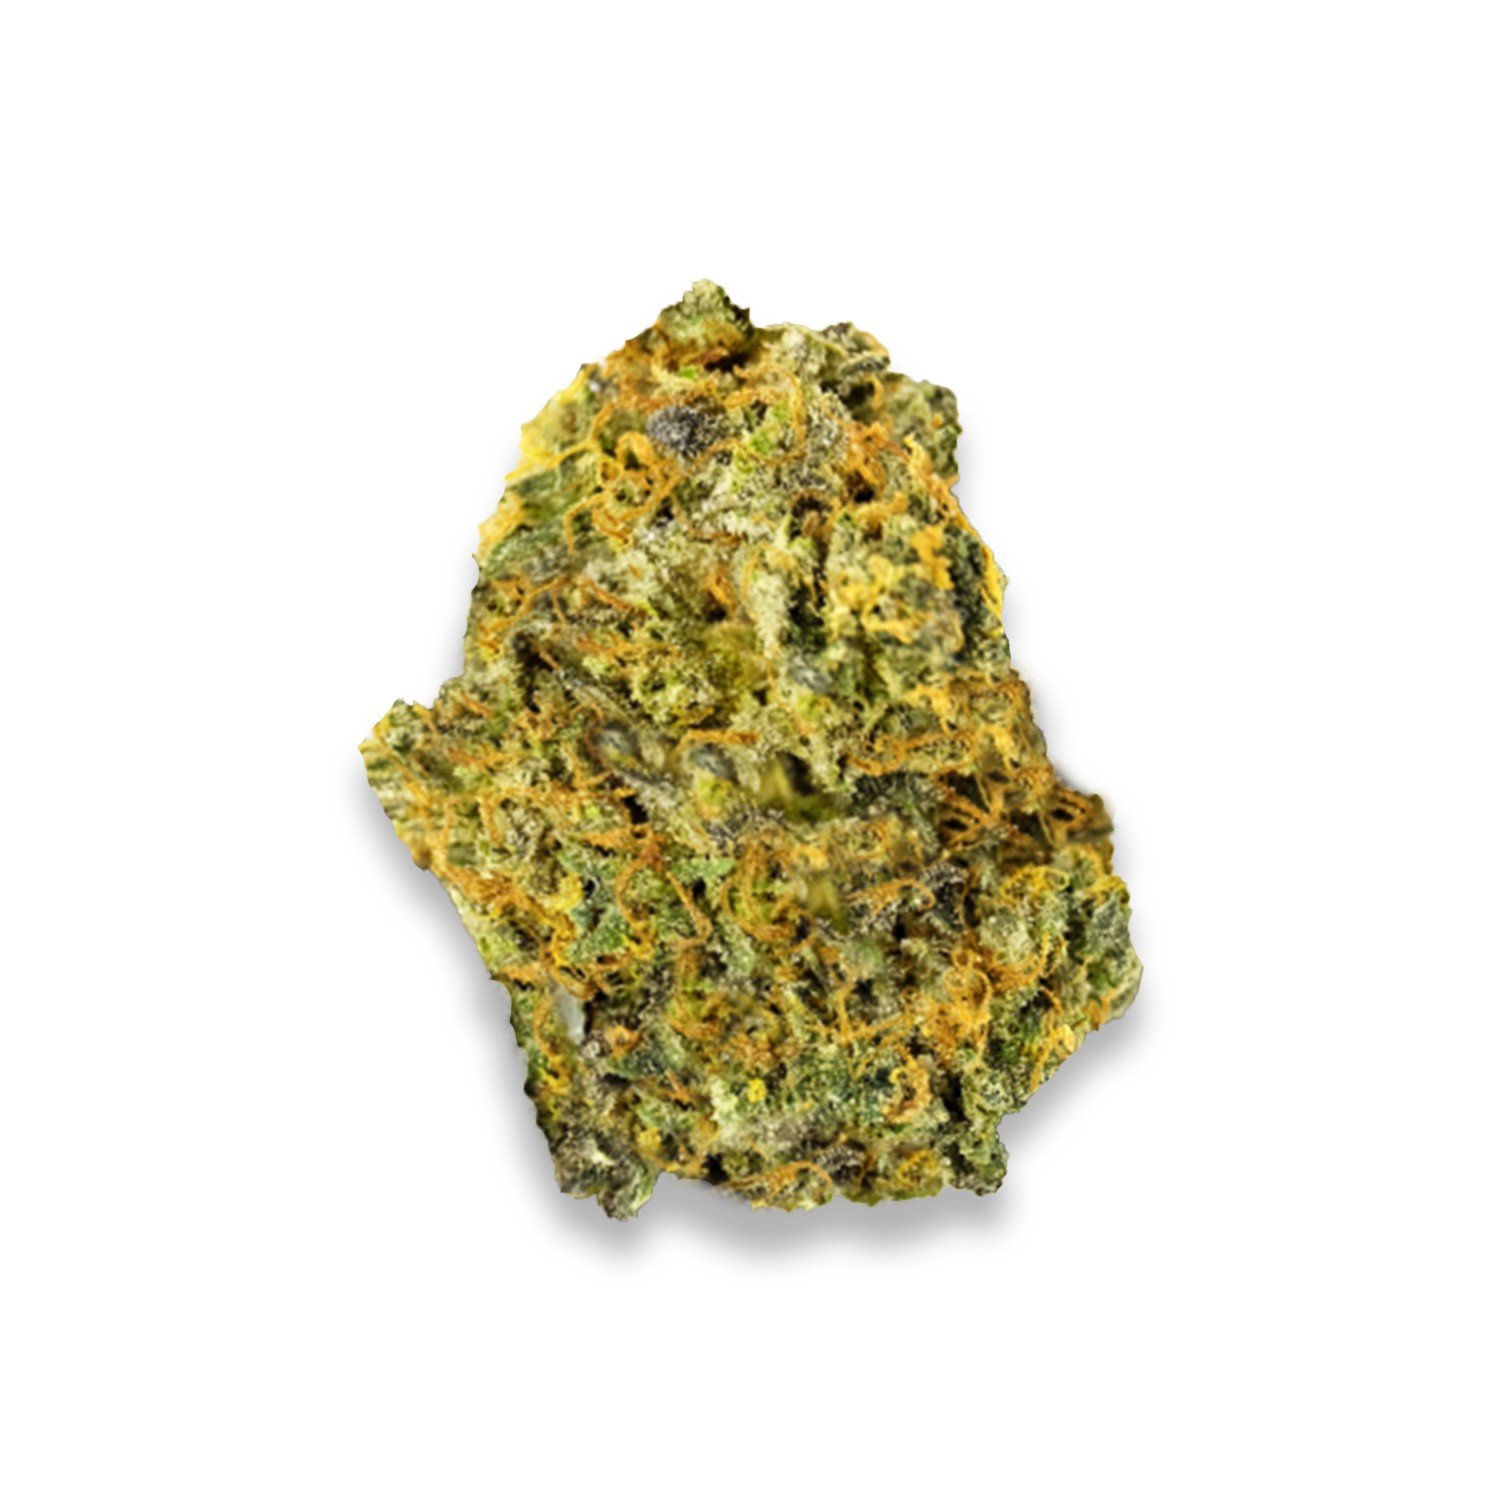 999 strain review